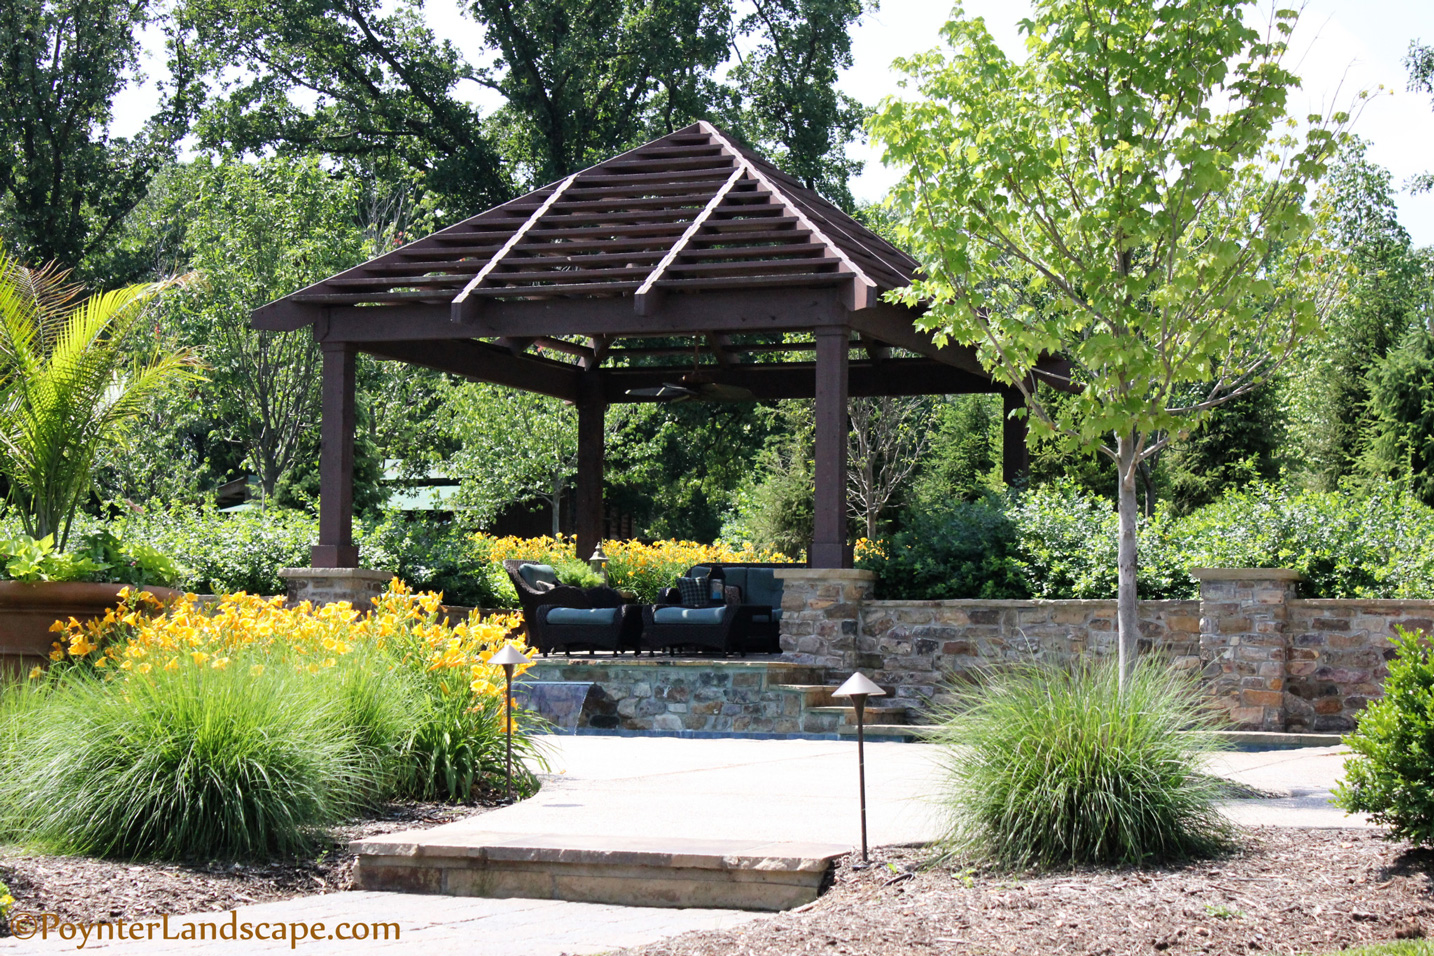 Outdoor Landscaping Company St. Charles, MO | St. Charles, MO Landscaping | Poynter Landscape